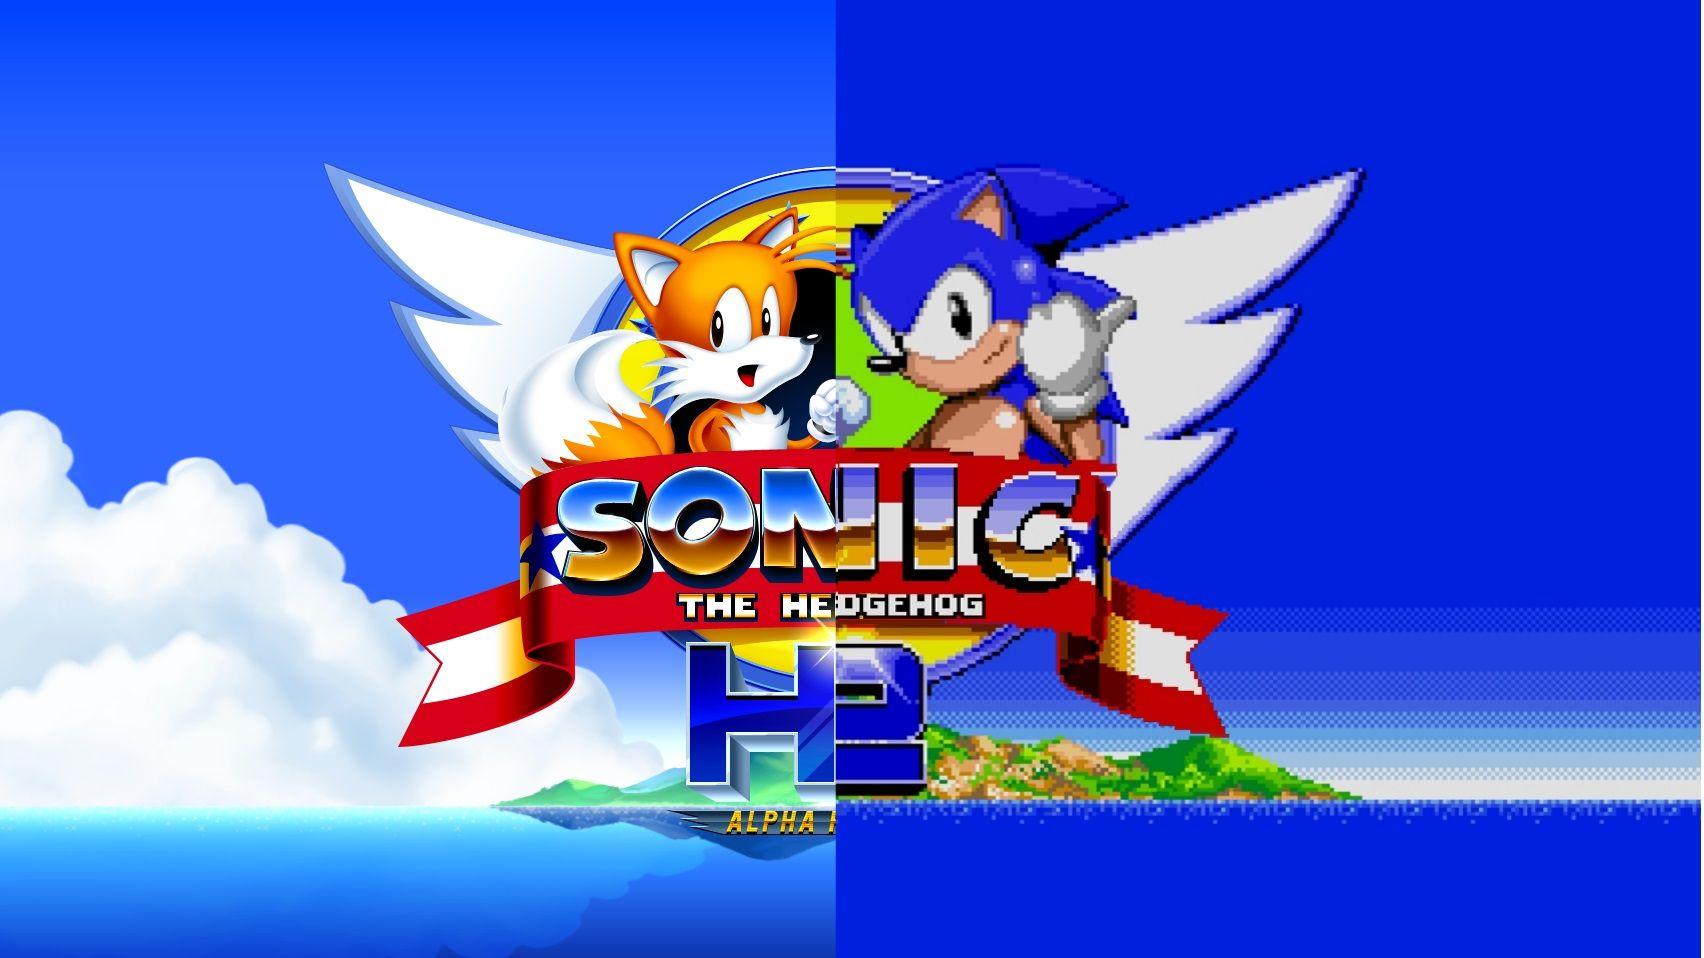 Sonic 2 Hd Wallpapers Top Free Sonic 2 Hd Backgrounds Wallpaperaccess